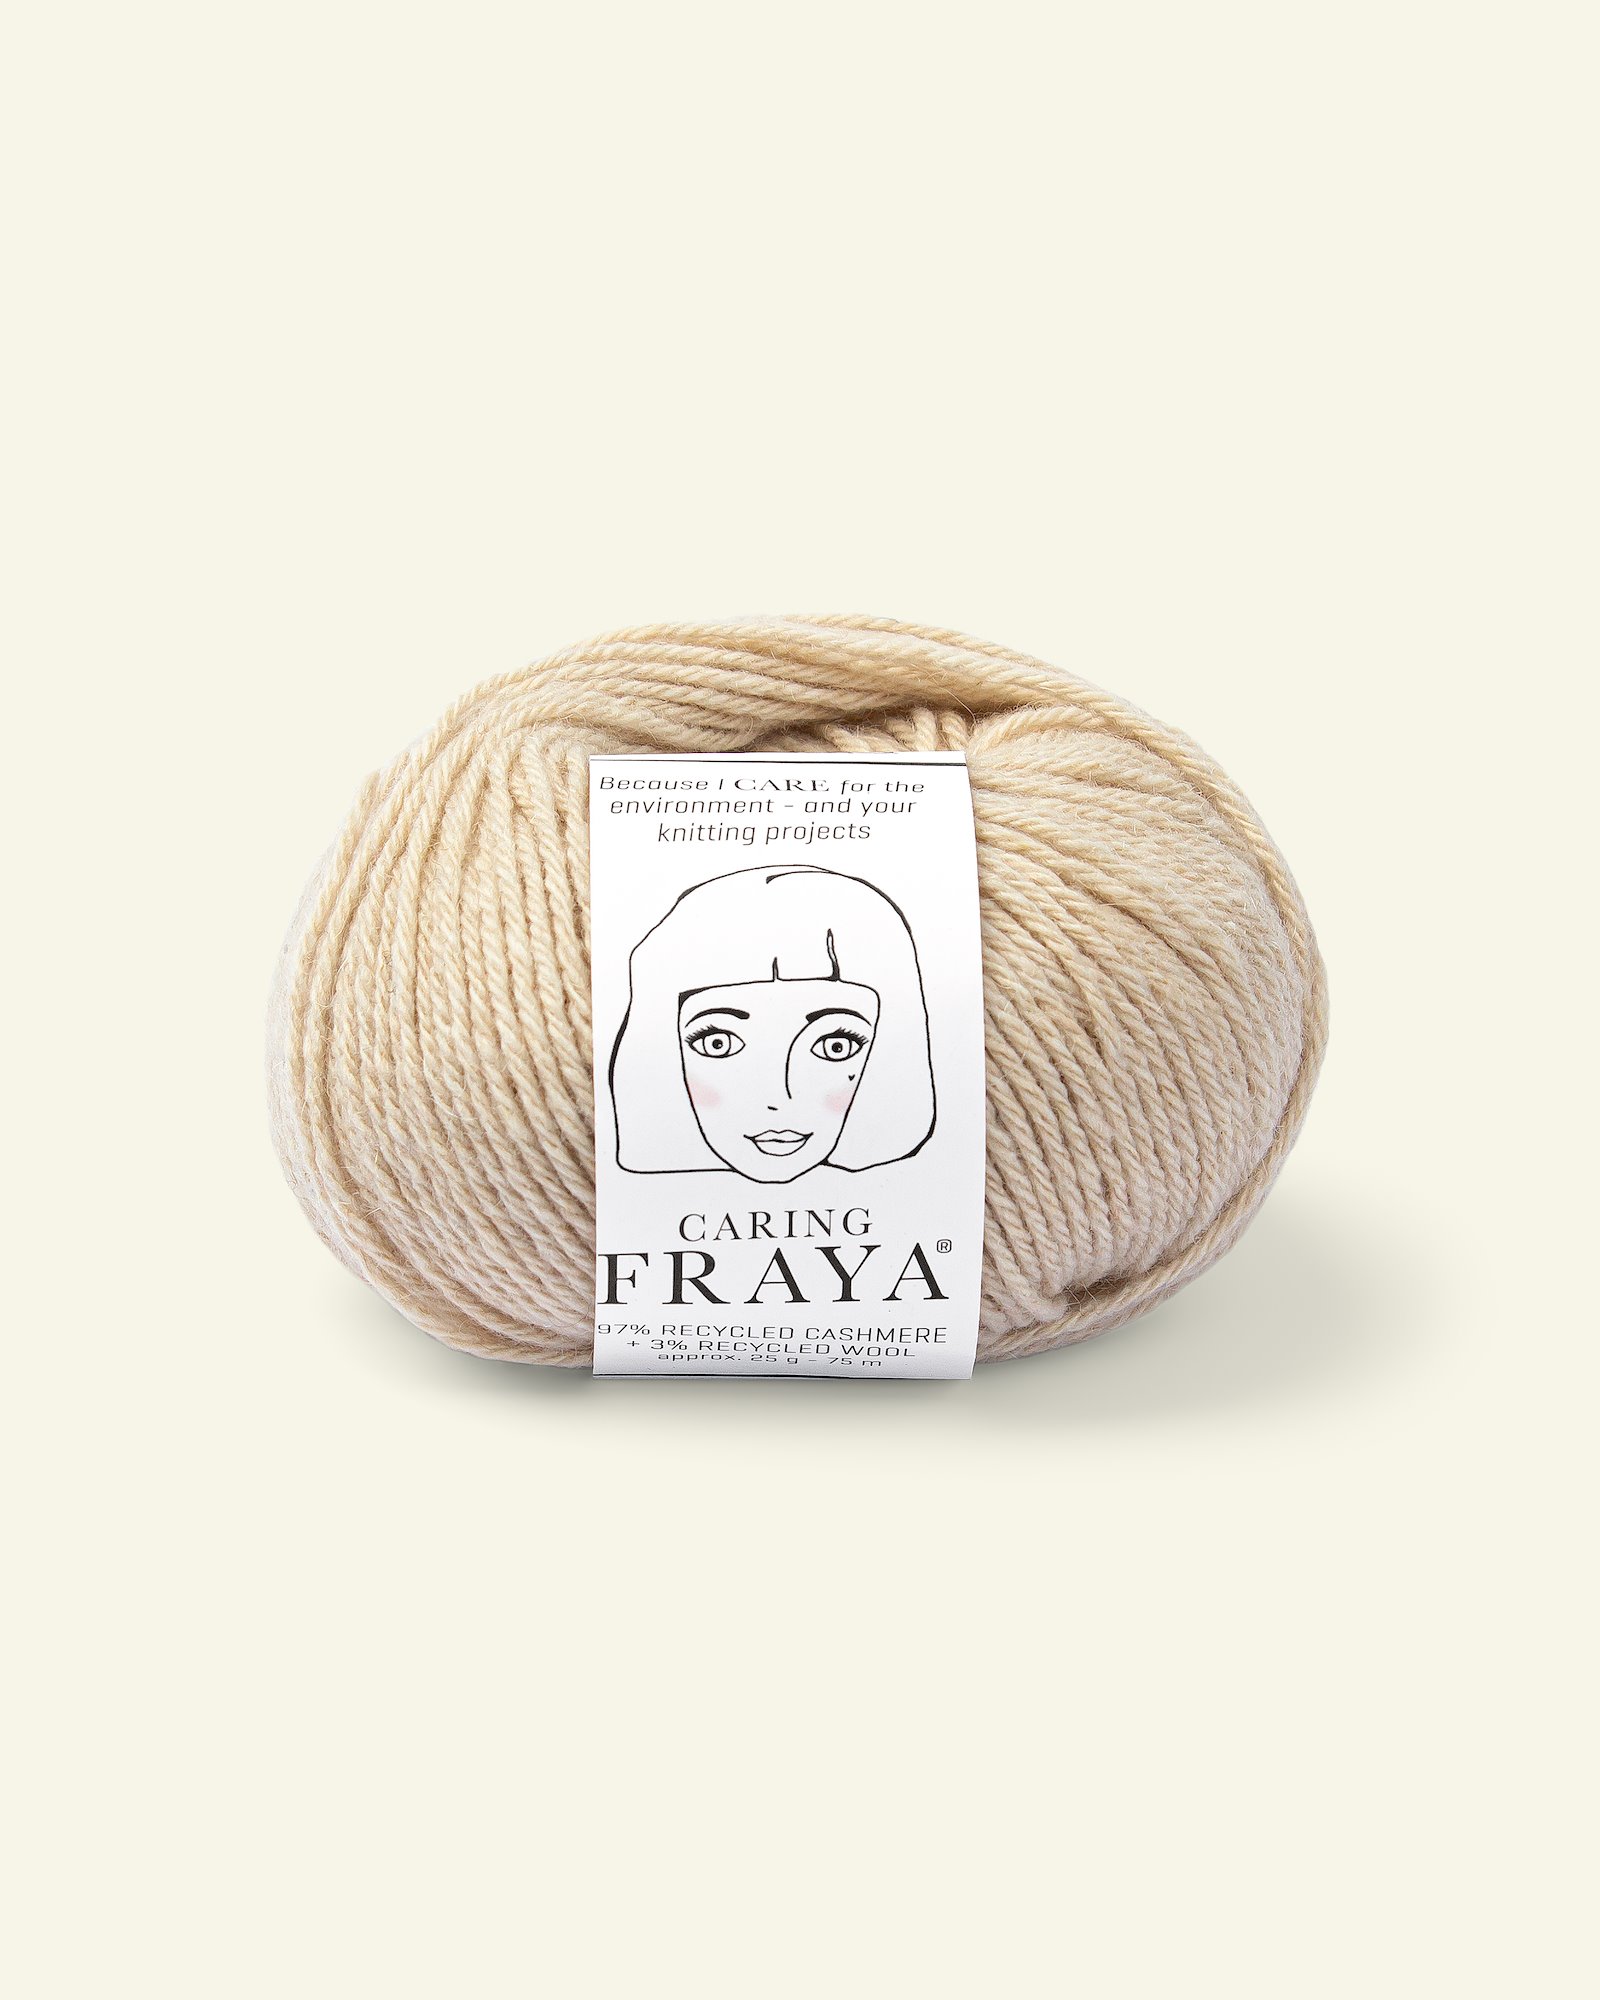 FRAYA, recycle cashmere yarn "Caring", nature 90000113_pack